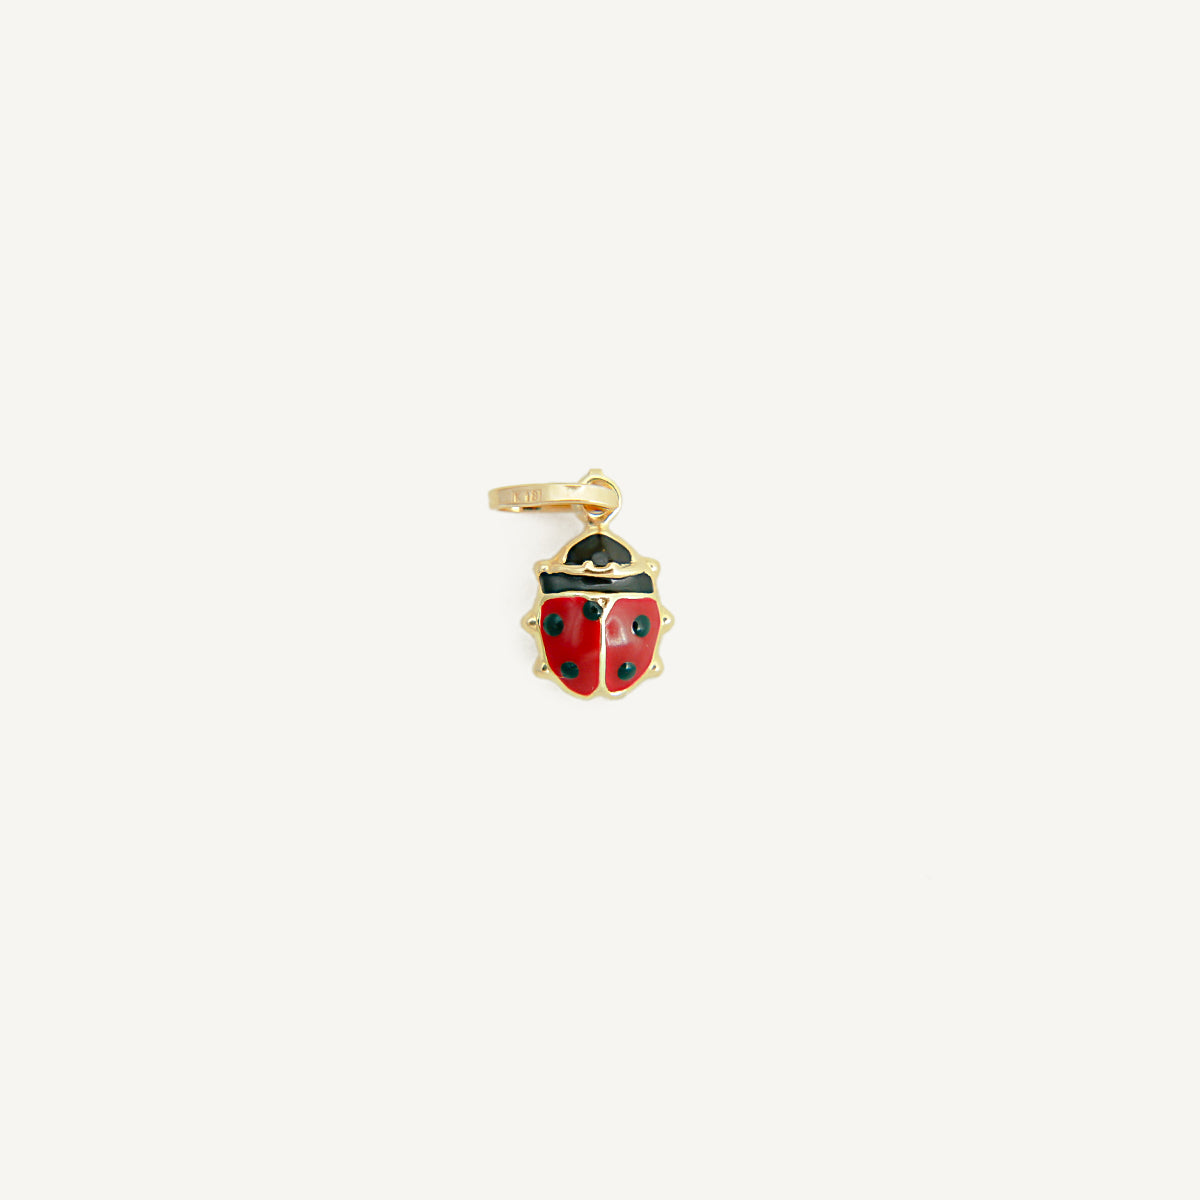 The Ladybug Charm in Solid Gold